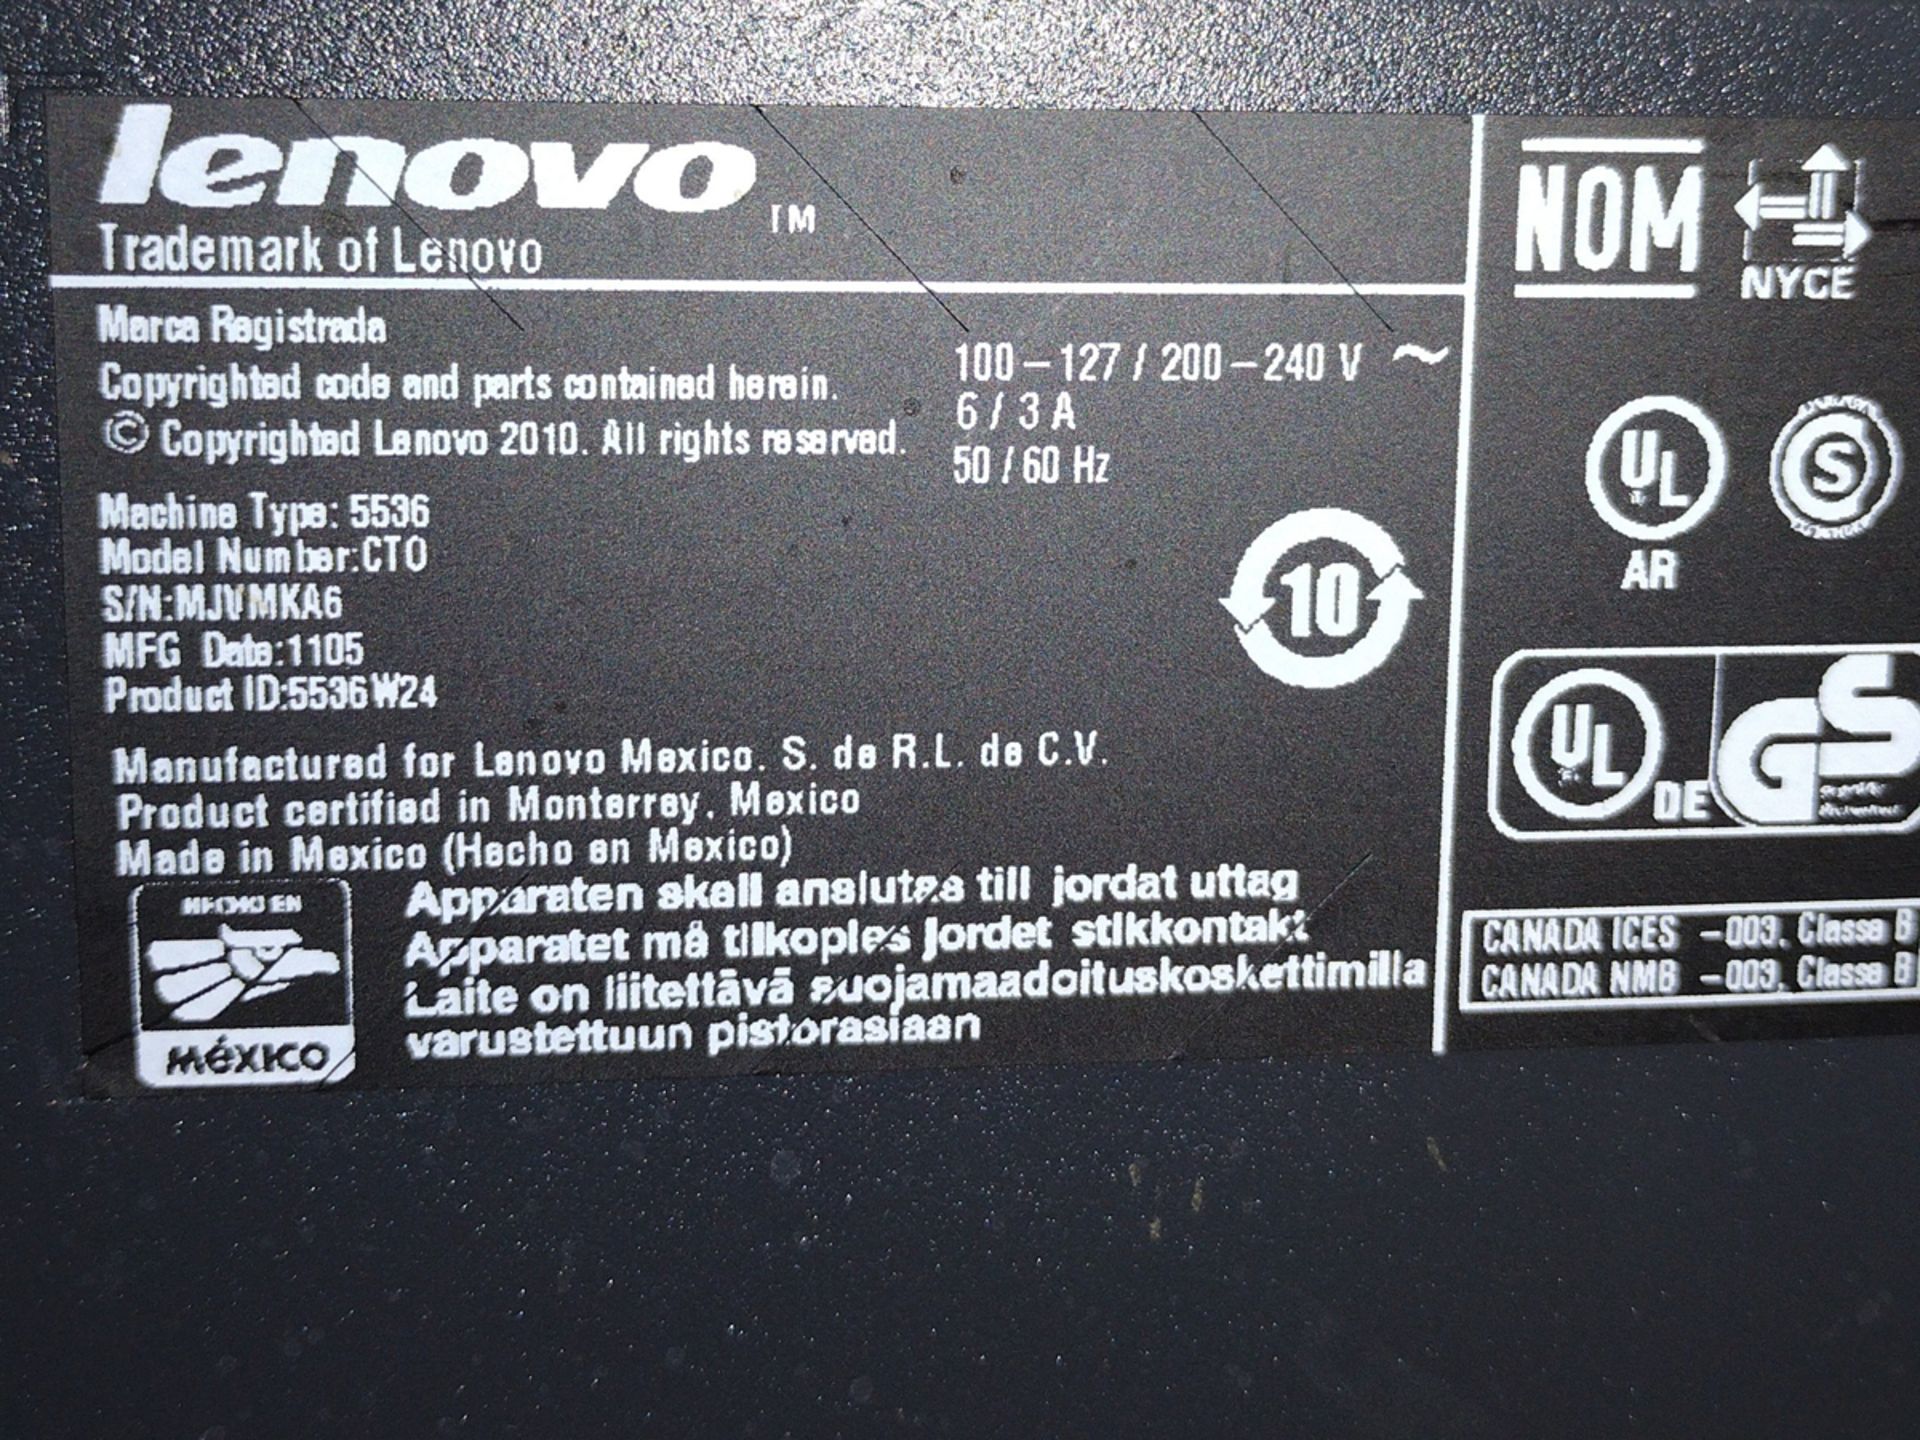 Lenovo CT0 M Series ThinkCentre i5 PC w/ Monitor and Keyboard - Image 2 of 2